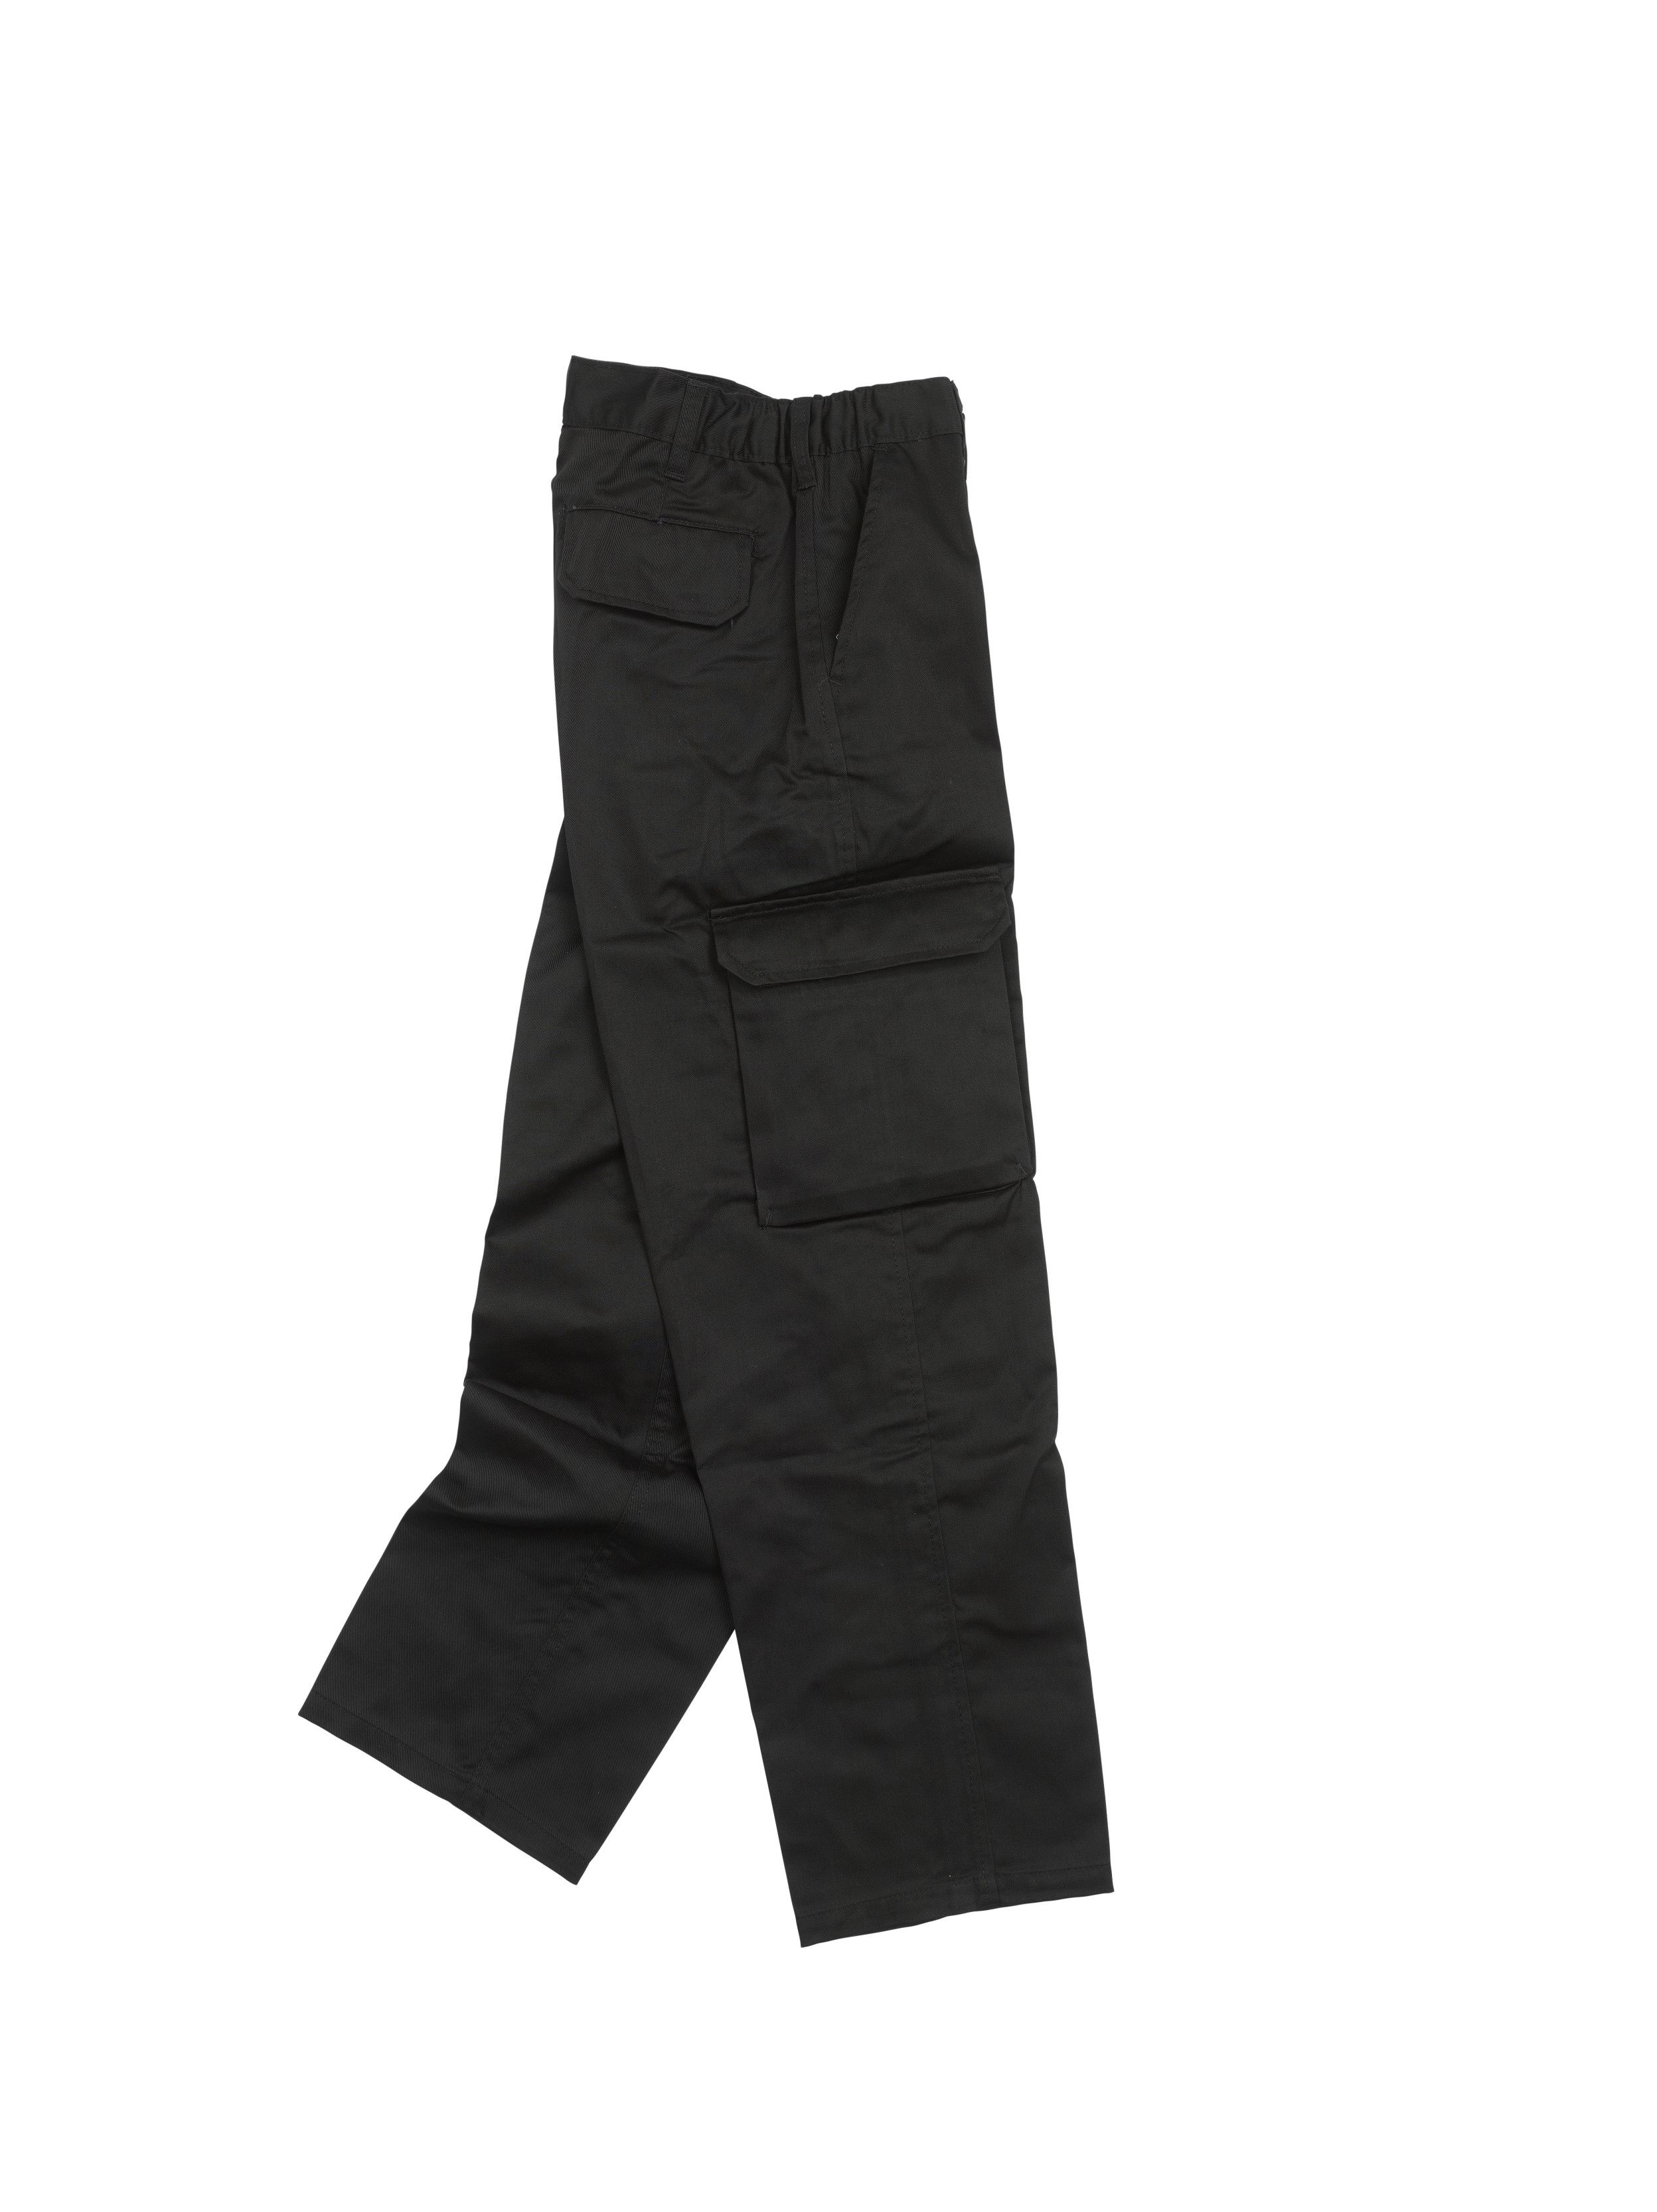 CARGO - LADIES TROUSER | Warrior Protects